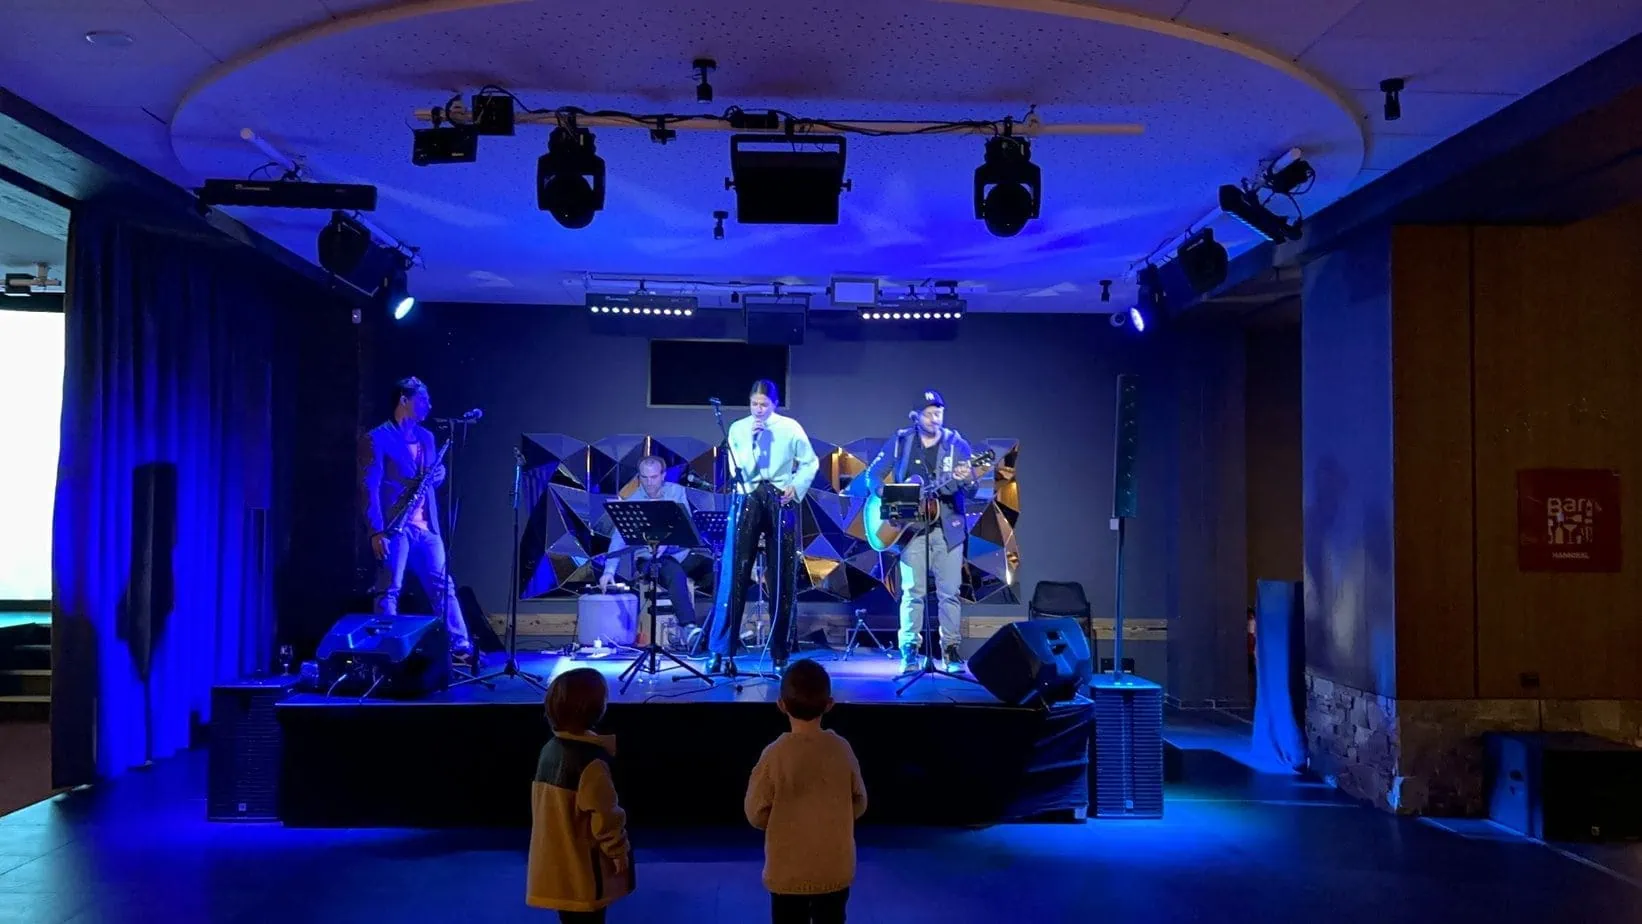 Family-friendly live music at Club Med La Rosière in blue-lit concert